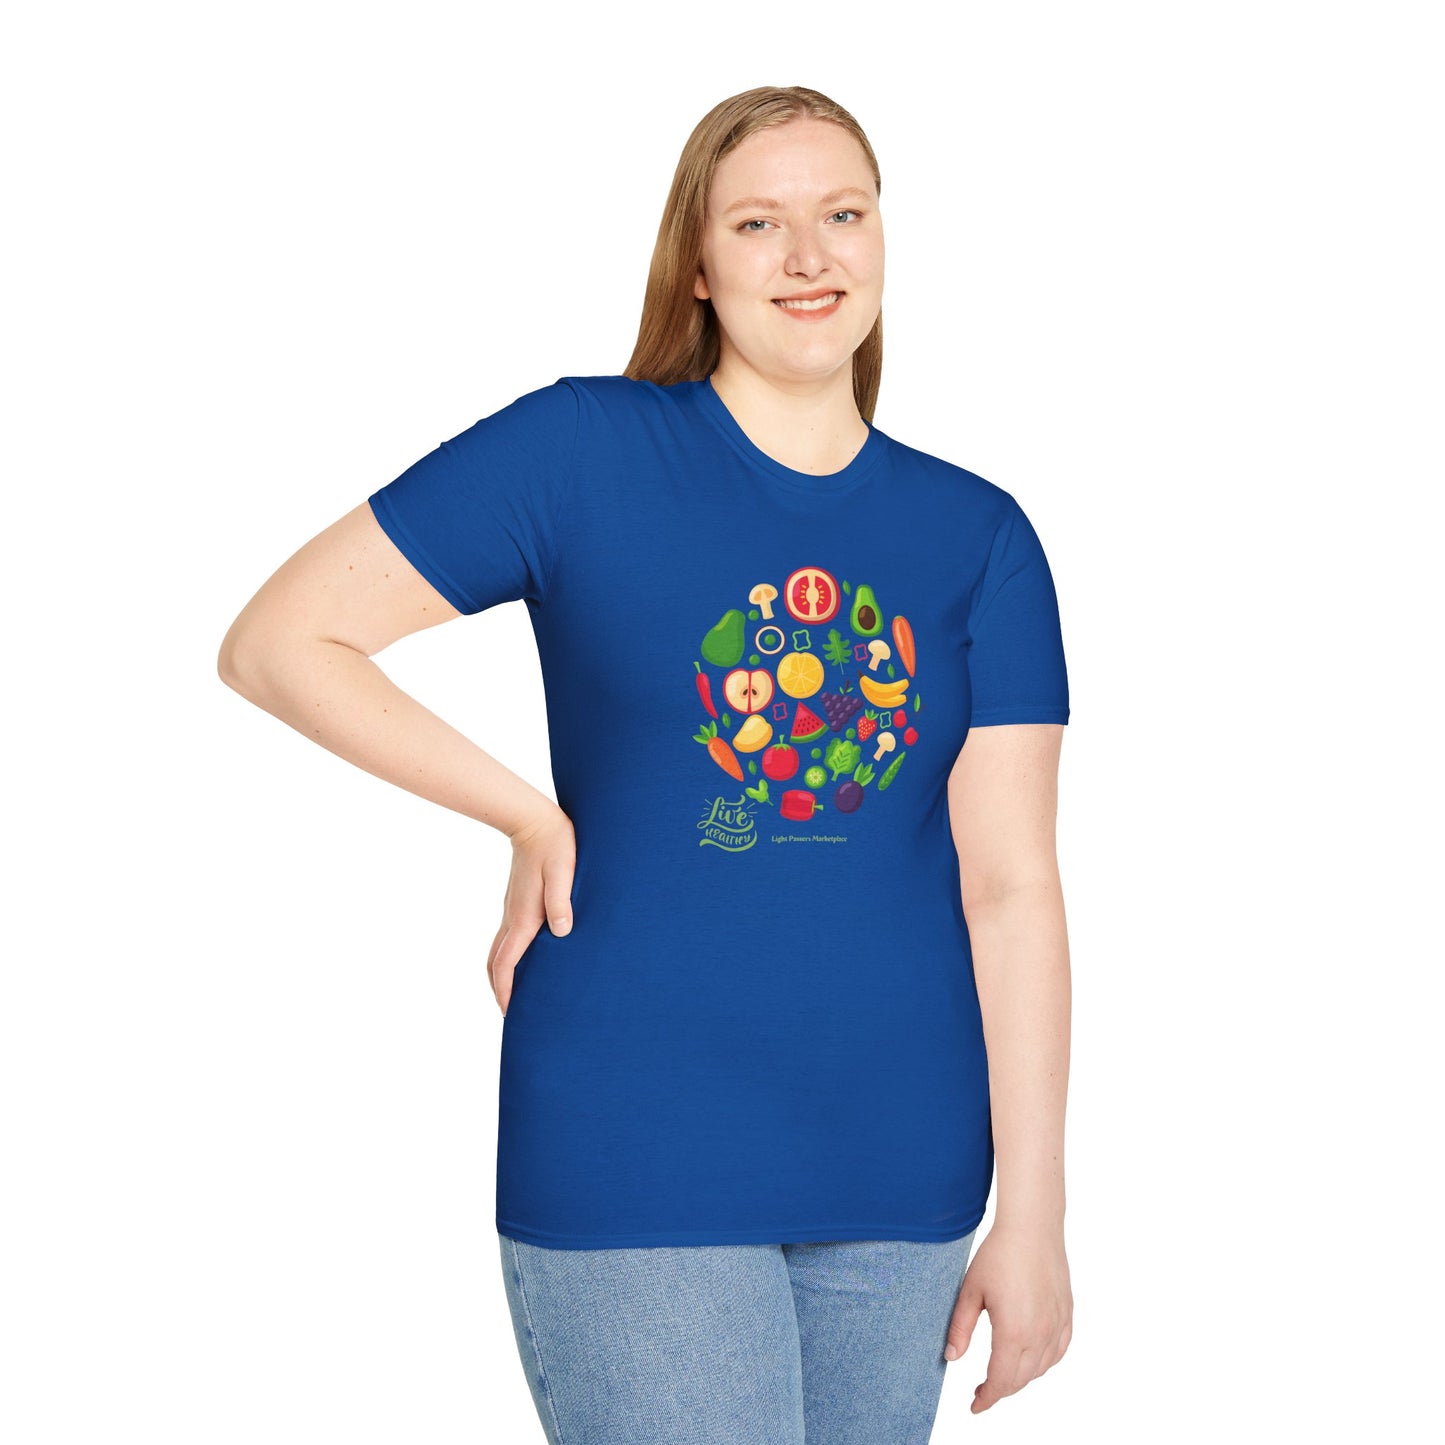 A woman in a blue shirt with a fruit design, smiling at the camera. Unisex soft-style t-shirt made of 100% ring-spun cotton, featuring twill tape shoulders and ribbed collar.